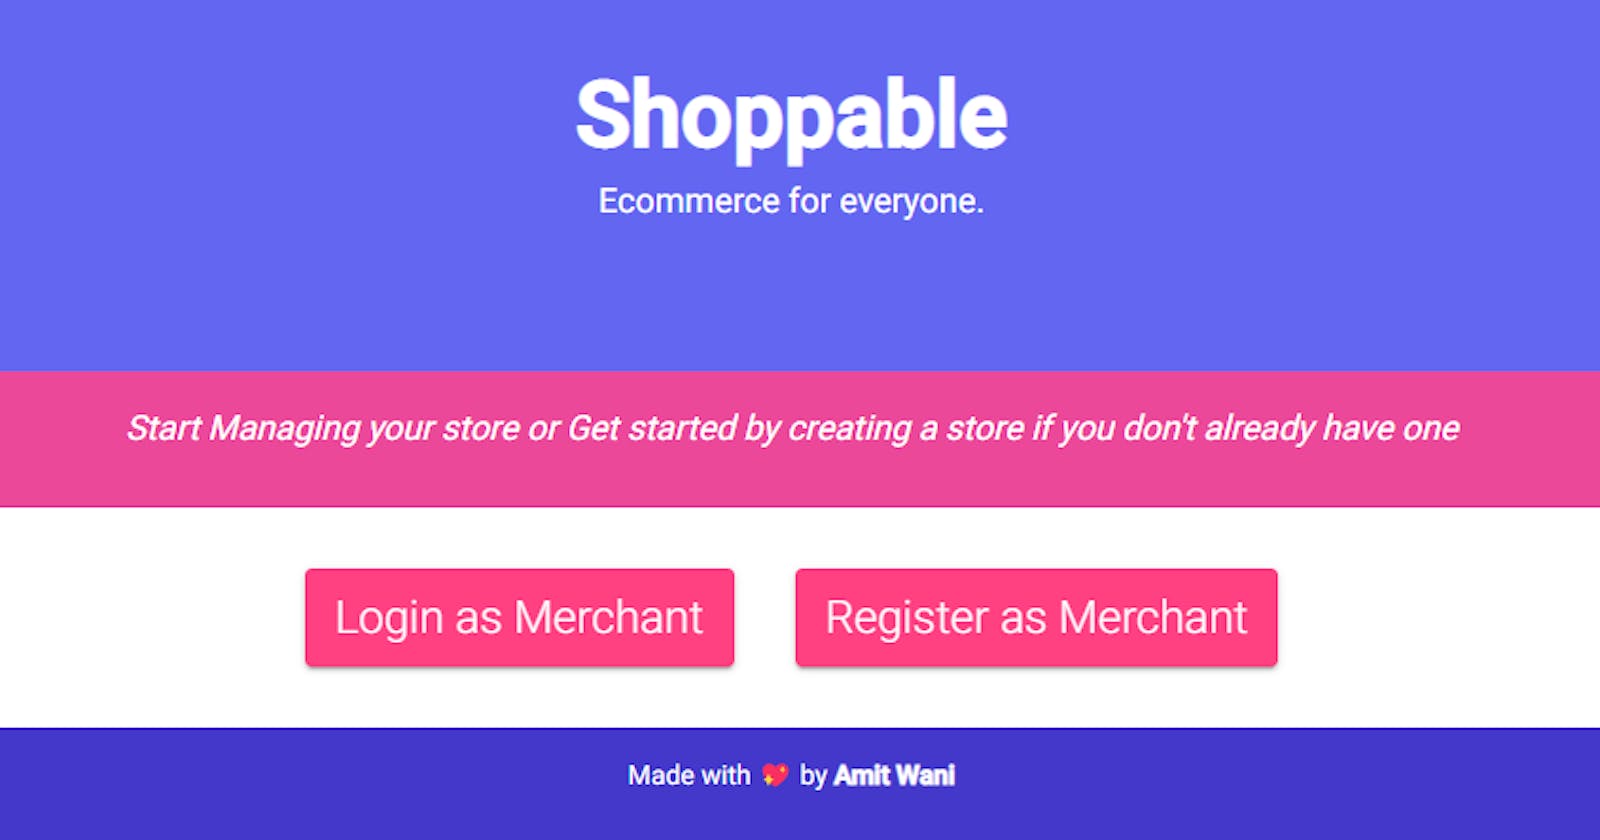 Shoppable - E-commerce For Everyone